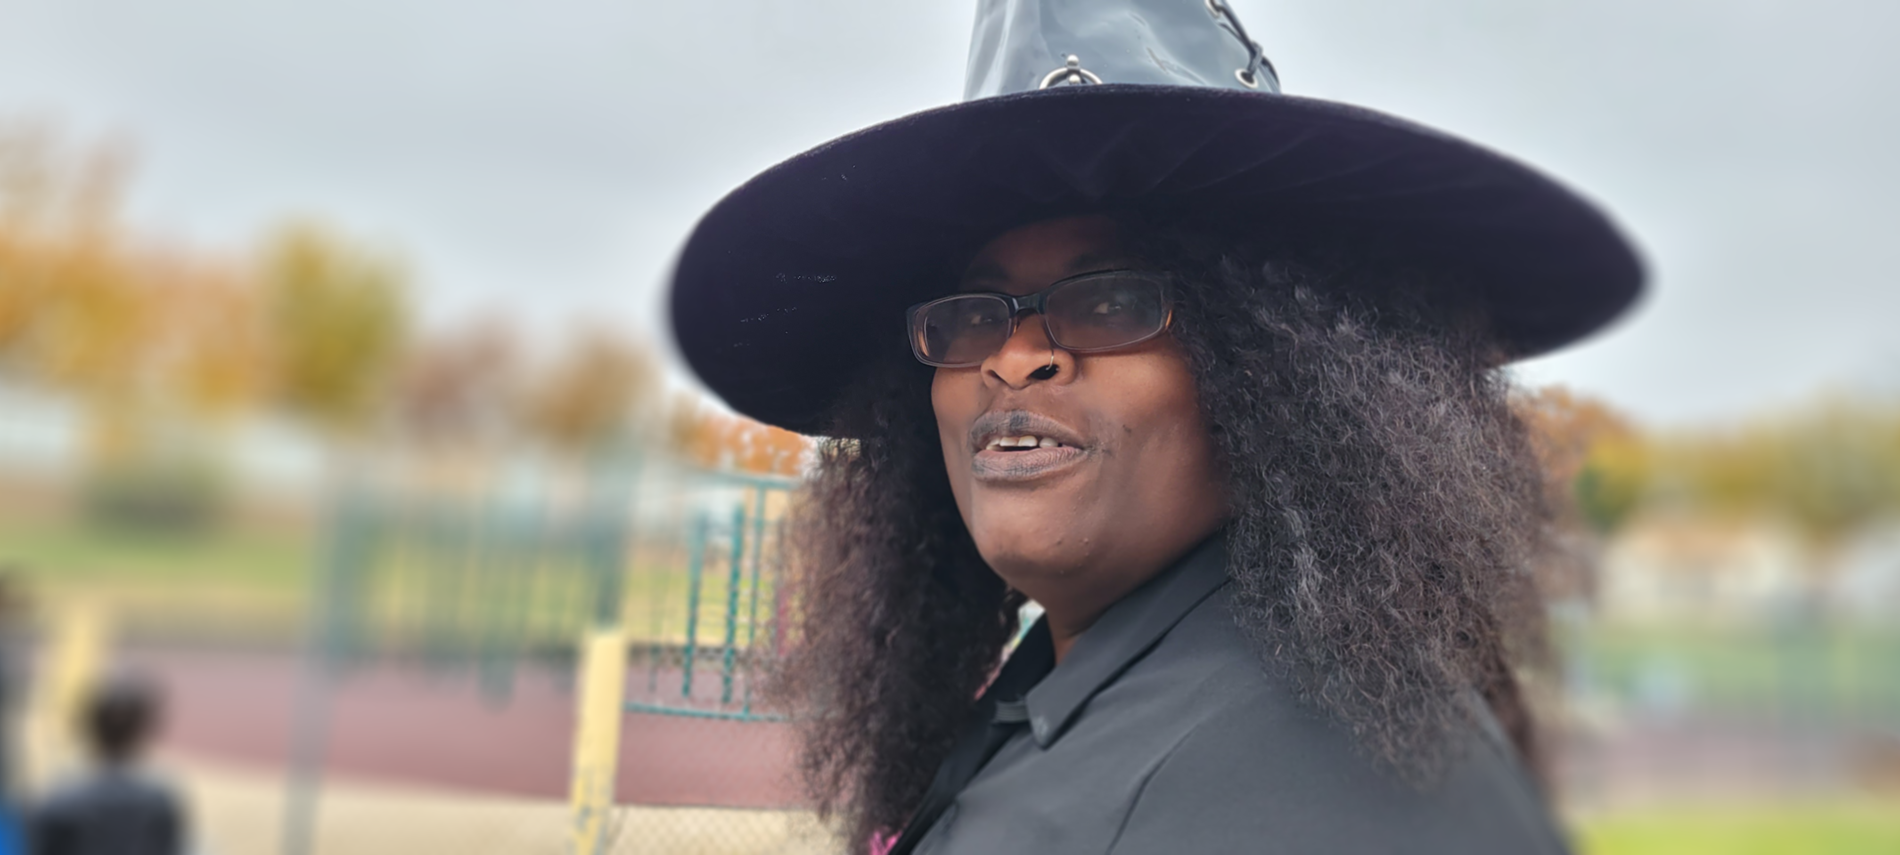 Trunk or treat pictures. teacher dressed as a witch